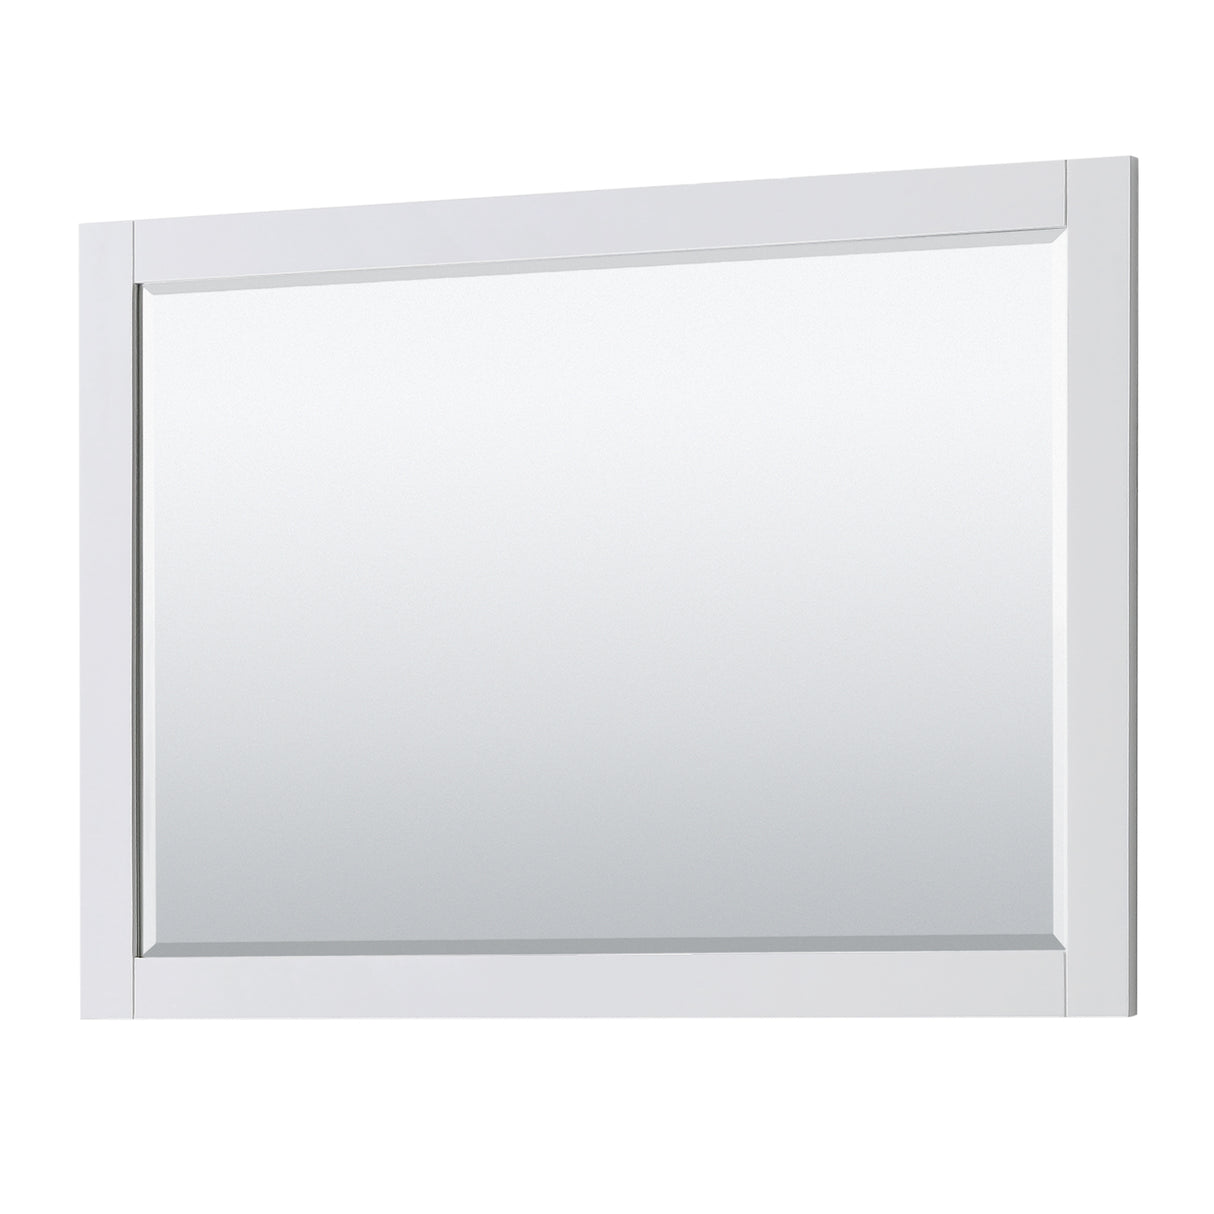 Avery 48 Inch Double Bathroom Vanity in White White Cultured Marble Countertop Undermount Square Sinks 46 Inch Mirror